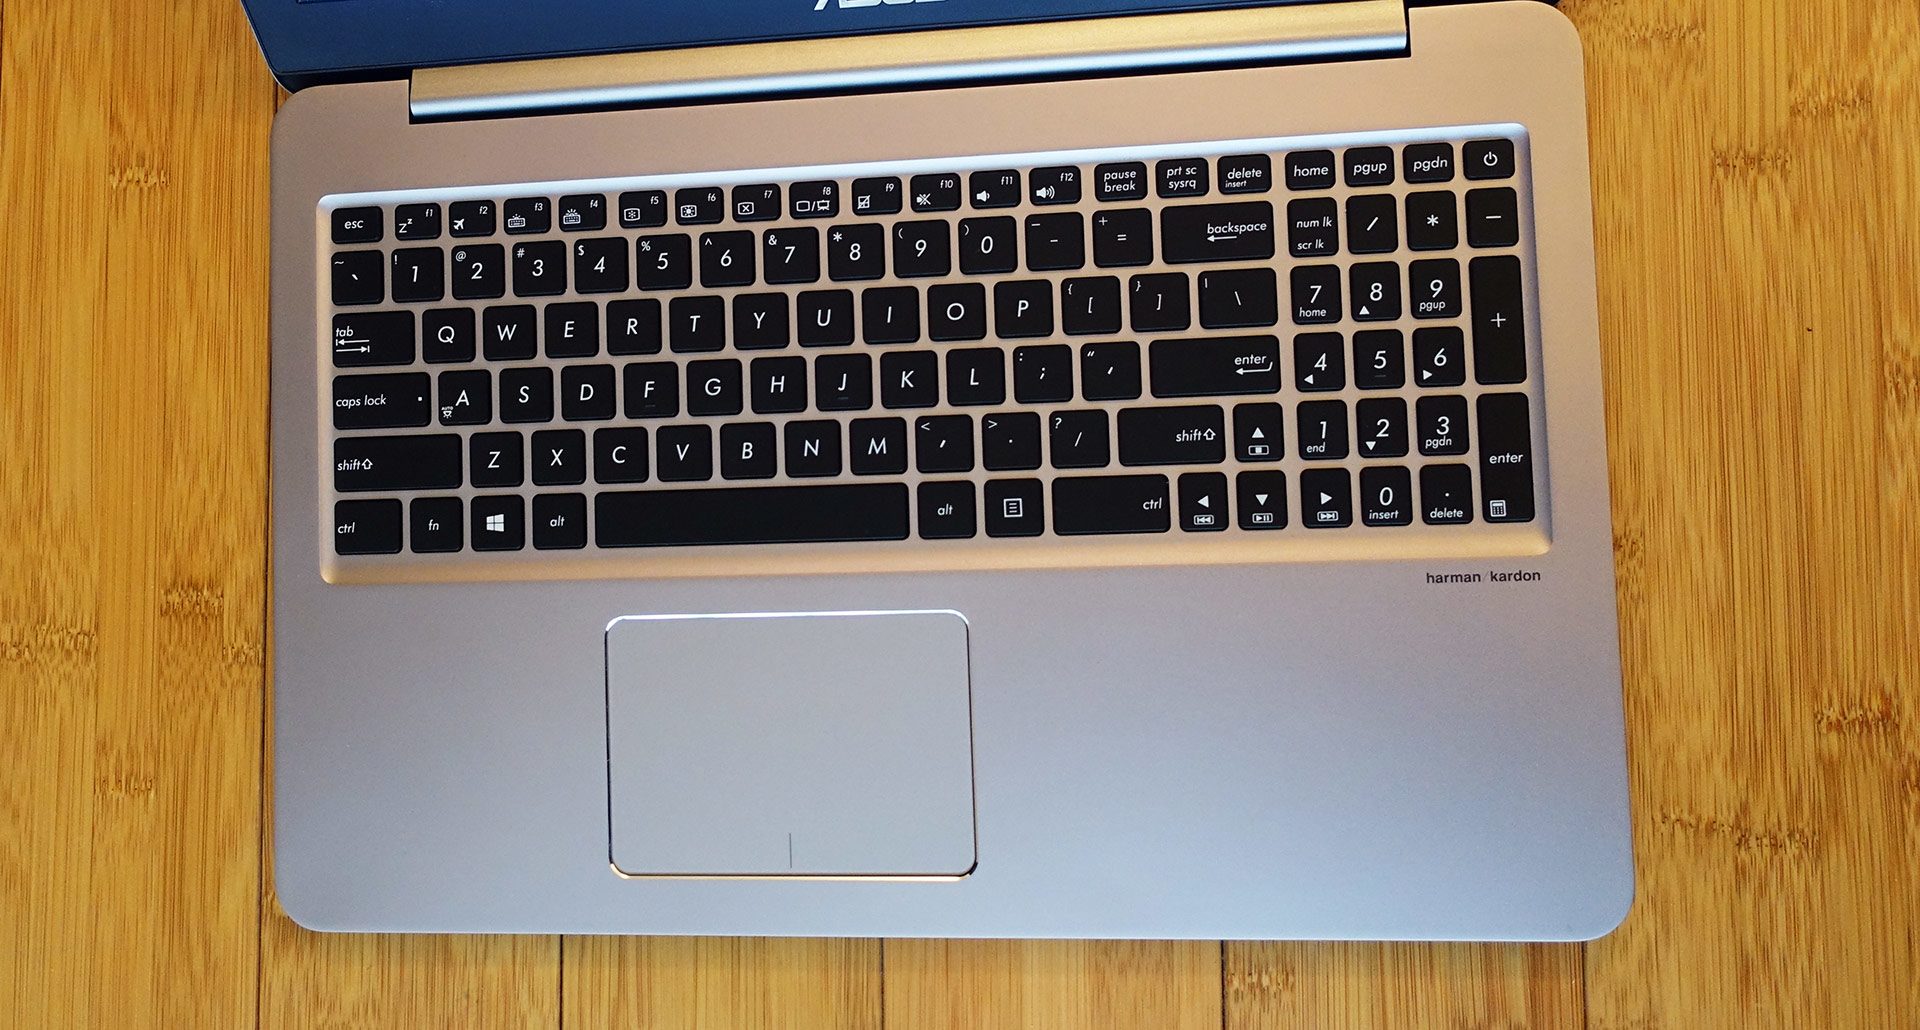 The UX510 gets a backlit full-size keyboard and a large trackpad